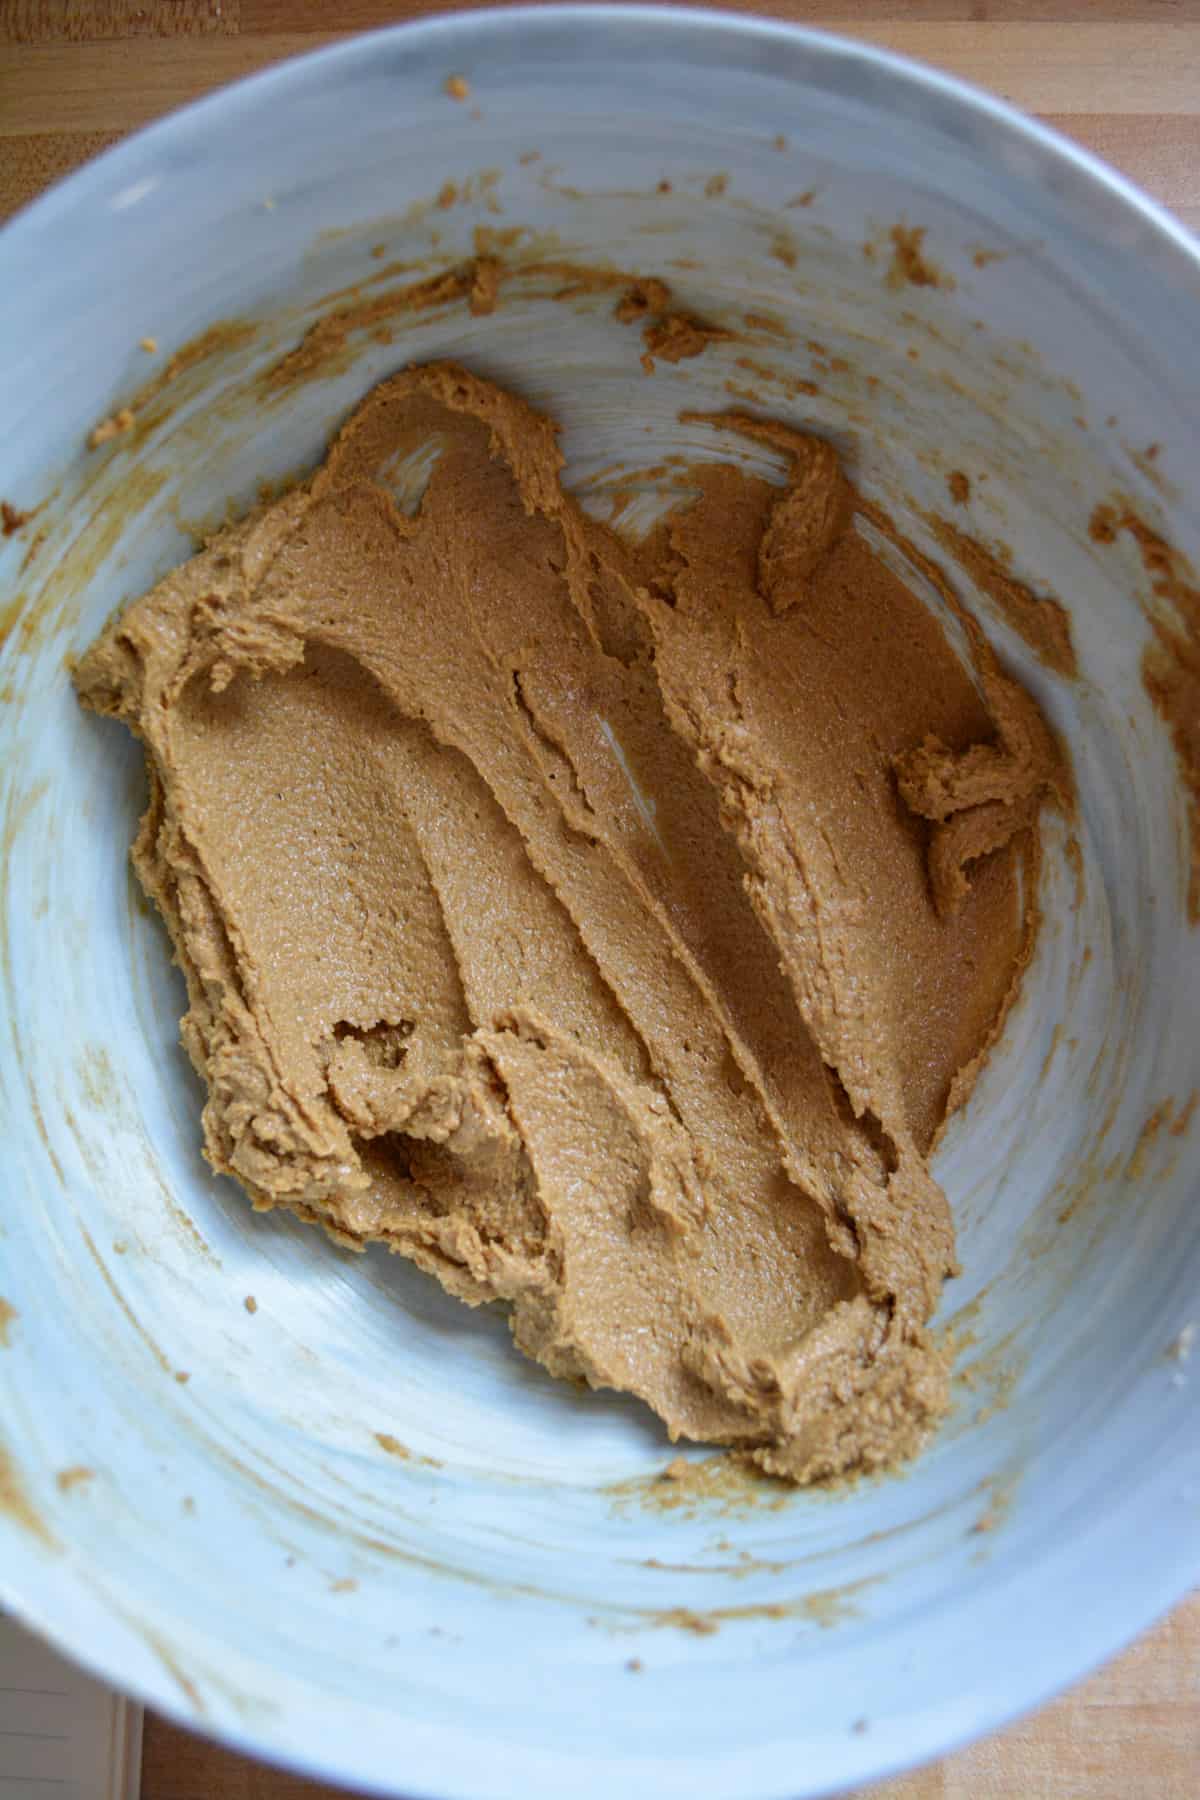 Vegan butter, sugar and molasses creamed together in a bowl.